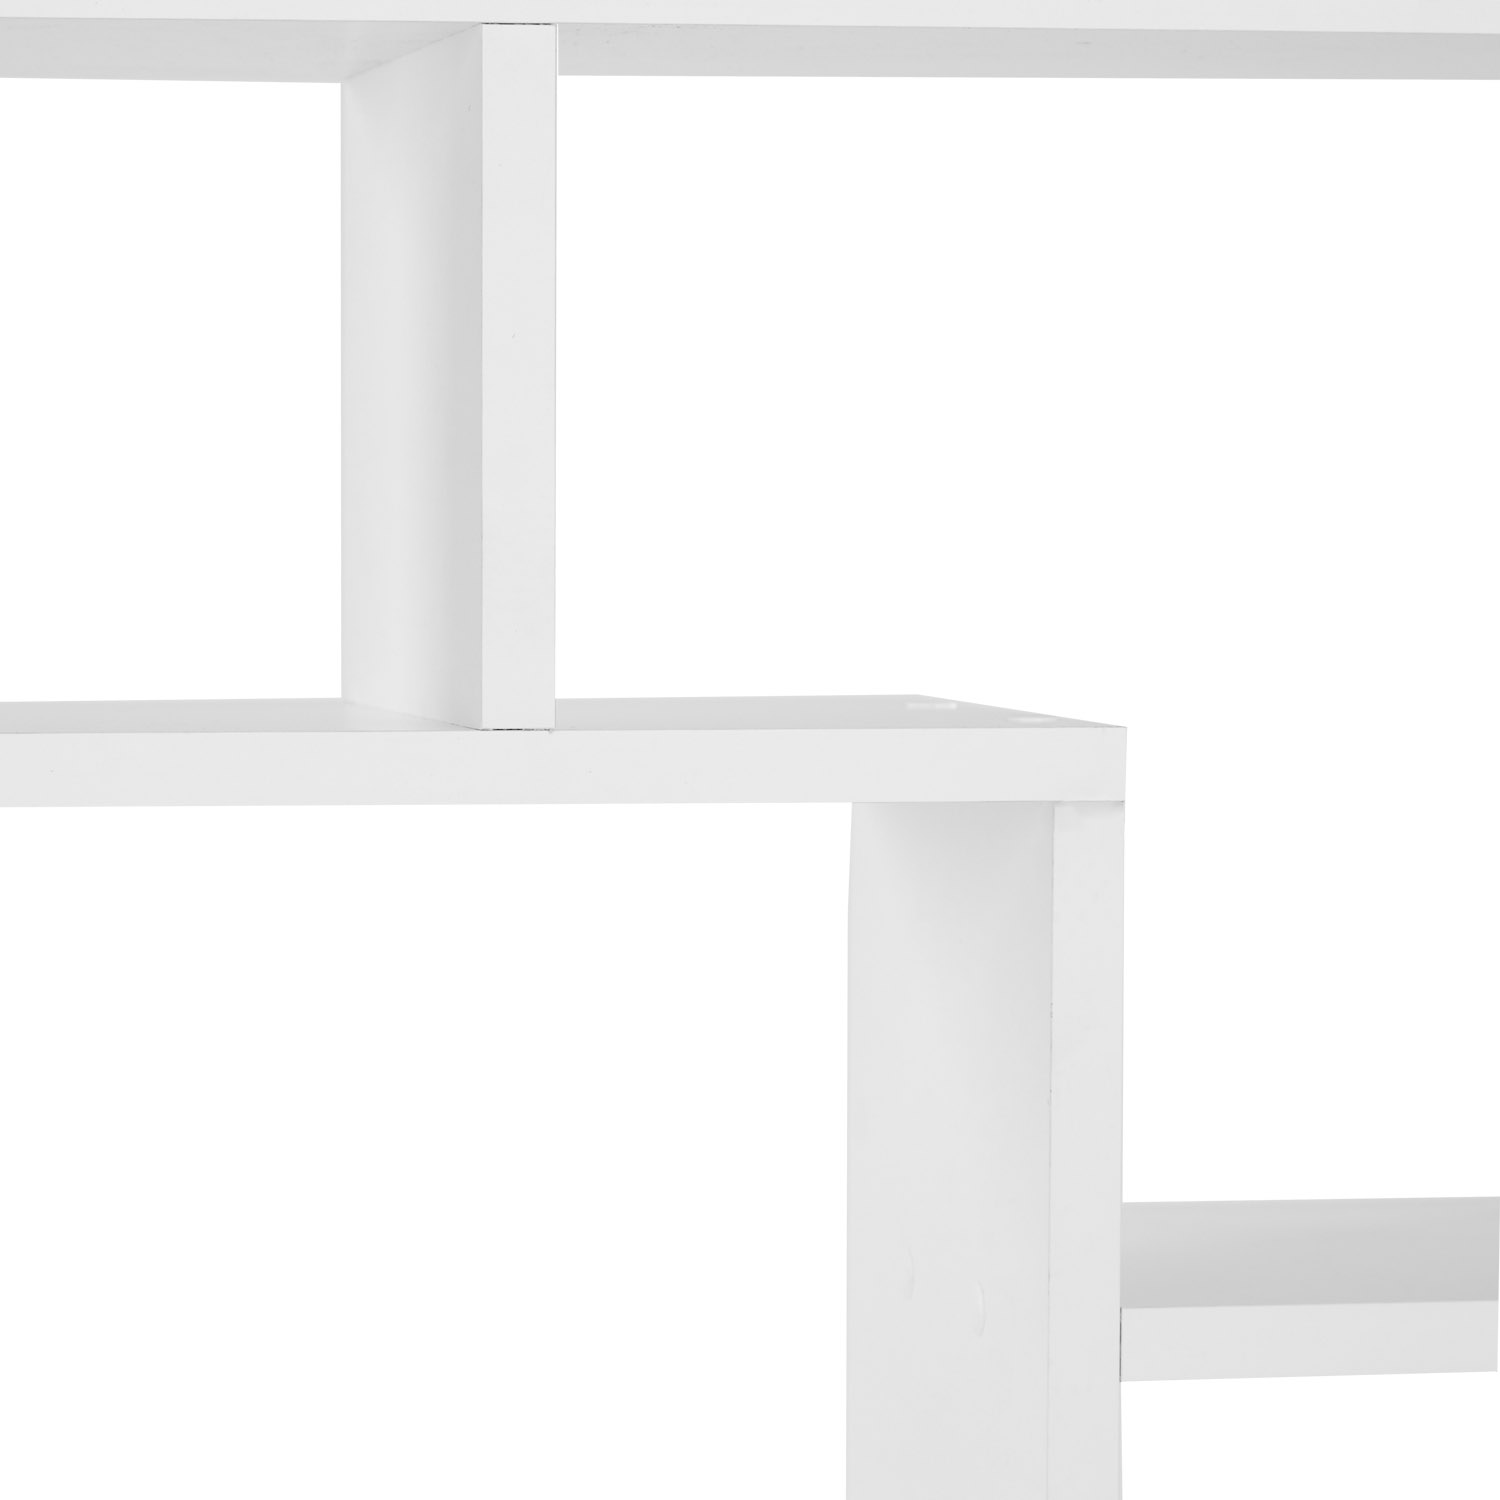 Shelf 4 Versions Floor or Wall Shelf 7 Compartments Bookcase Oak White Wood Solid Modern